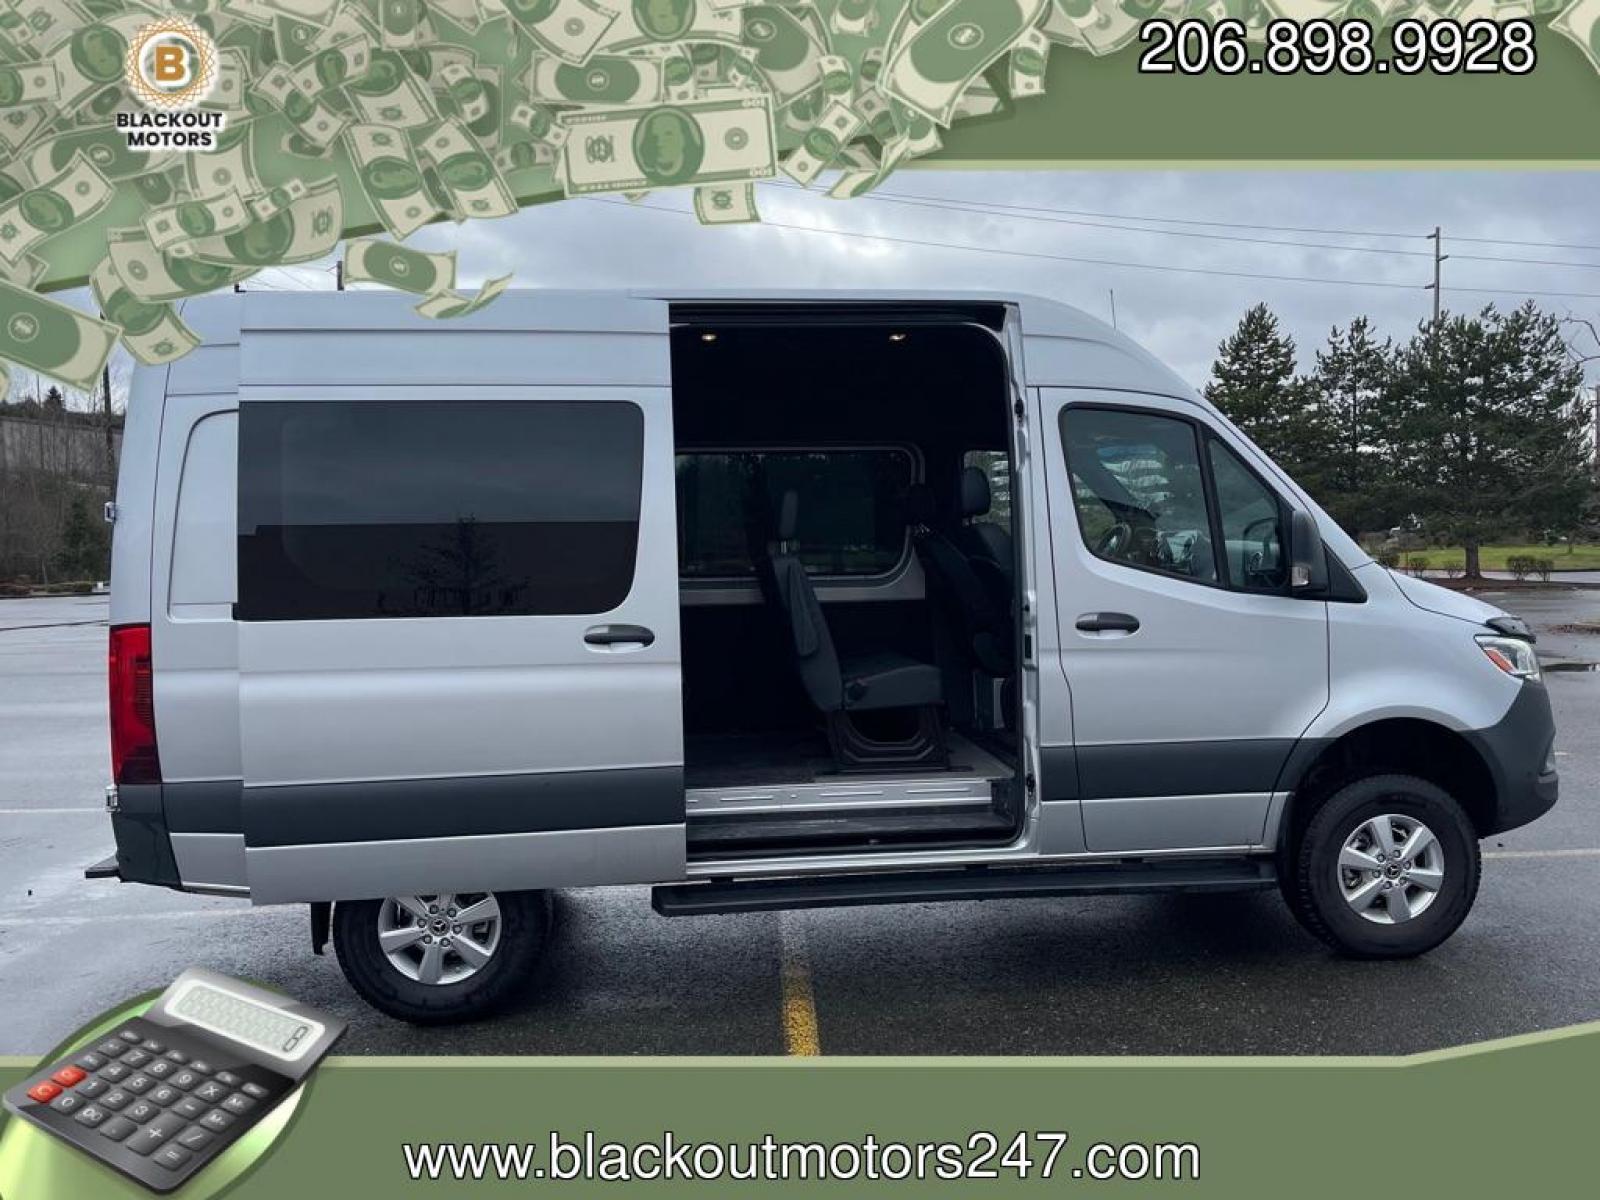 2021 IRIDIUM SILVER METALLIC /GRAY MERCEDES-BENZ SPRINTER CREW 2500 HIGH ROOF V6 144''WB, 4WD (W1W4EBVY9MT) with an 3.0L engine, Automatic transmission, located at 1505 S 356th St., Federal Way, WA, 98003, 47.282051, -122.314781 - THIS IS A HIGH ROOF MODEL!!!!!!! Standing height is 6'3'' inside. One Owner-CUSTOM BUILT FOR ONLY $89,999! You will not find a 4x4 TURBODIESEL V6, with a HIGH ROOF model like this with TOW and DRIVER ASSIST PACKAGES. Customization includes: Parking Package with 360 SURROUND-VIEW CAMER - Photo #0